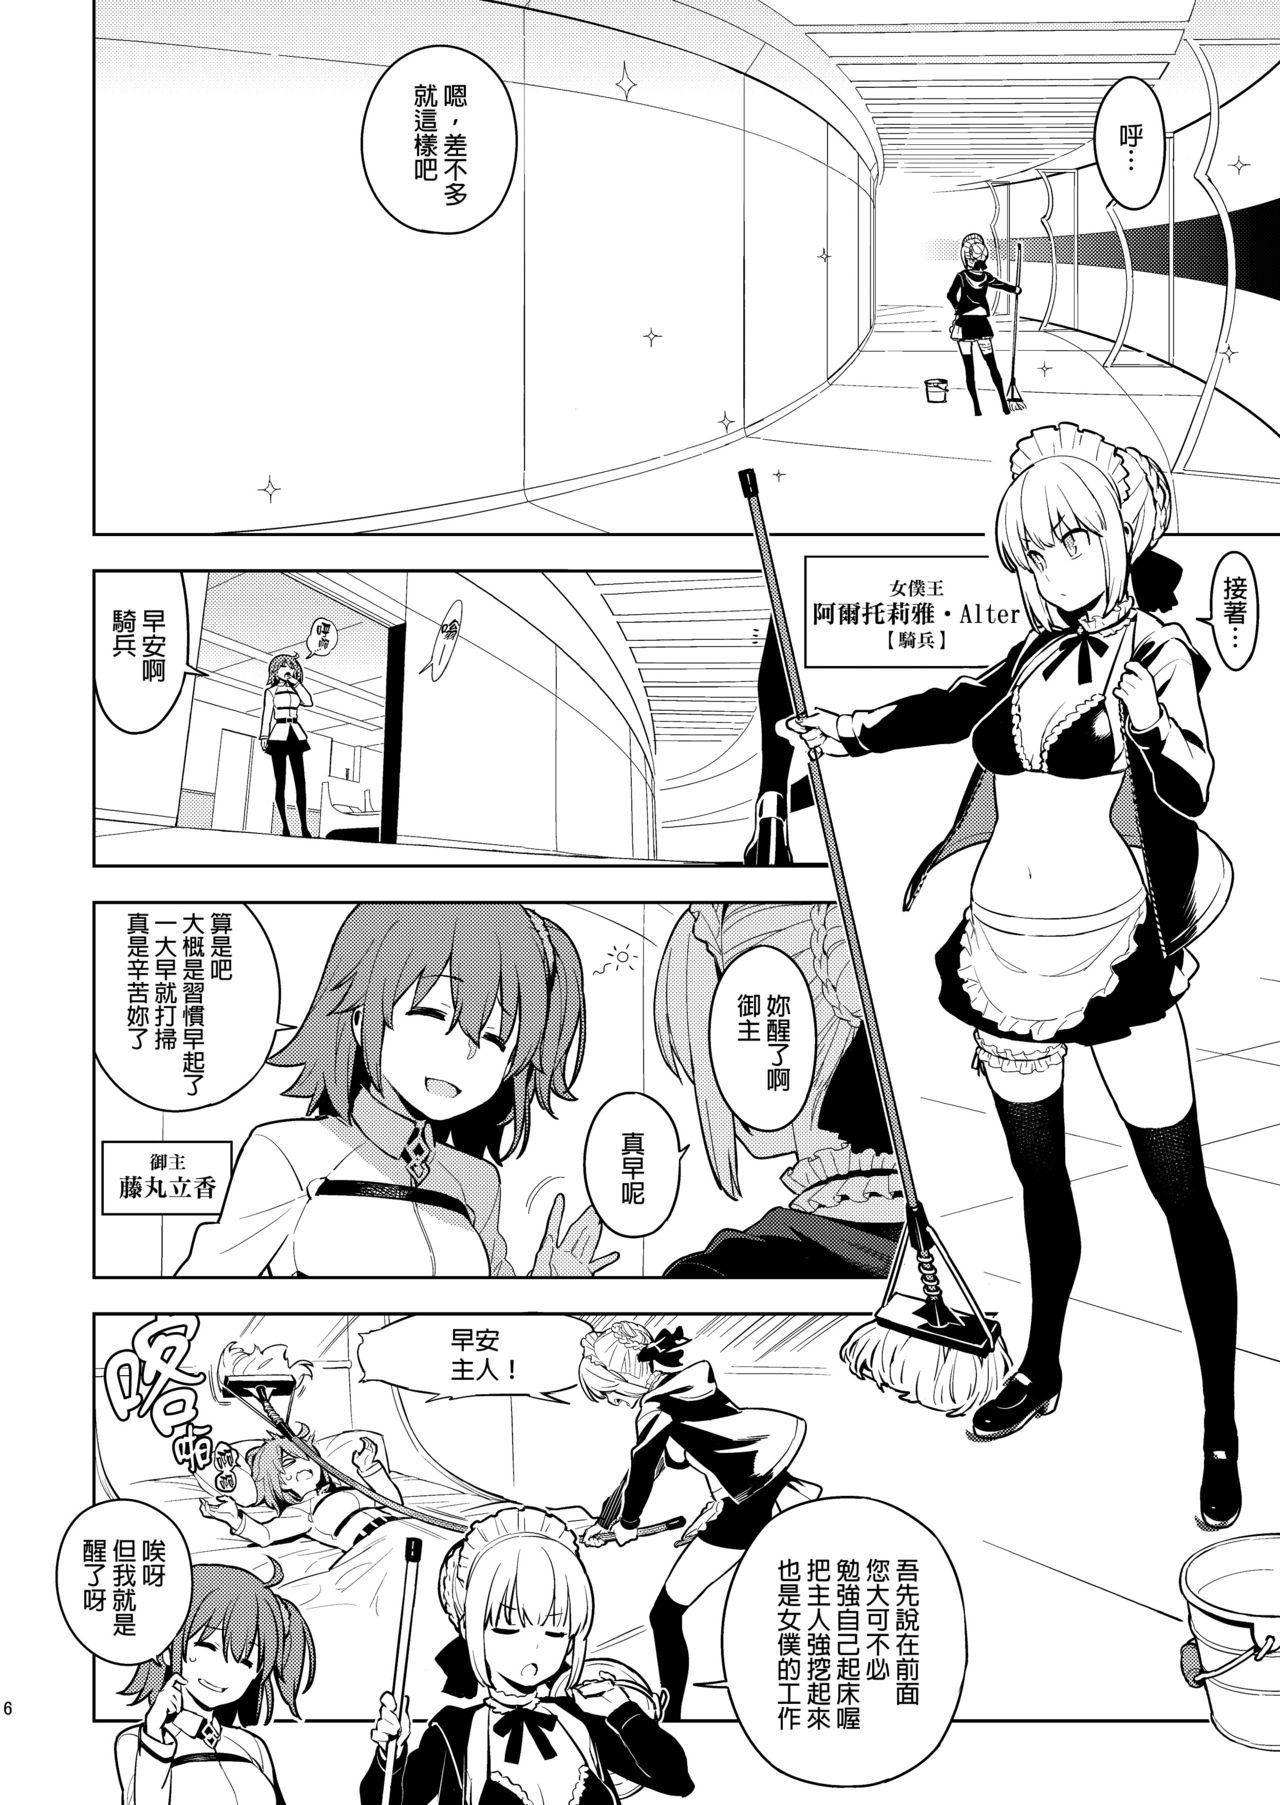 Asians DELUSION - Fate grand order Hardcoresex - Page 5